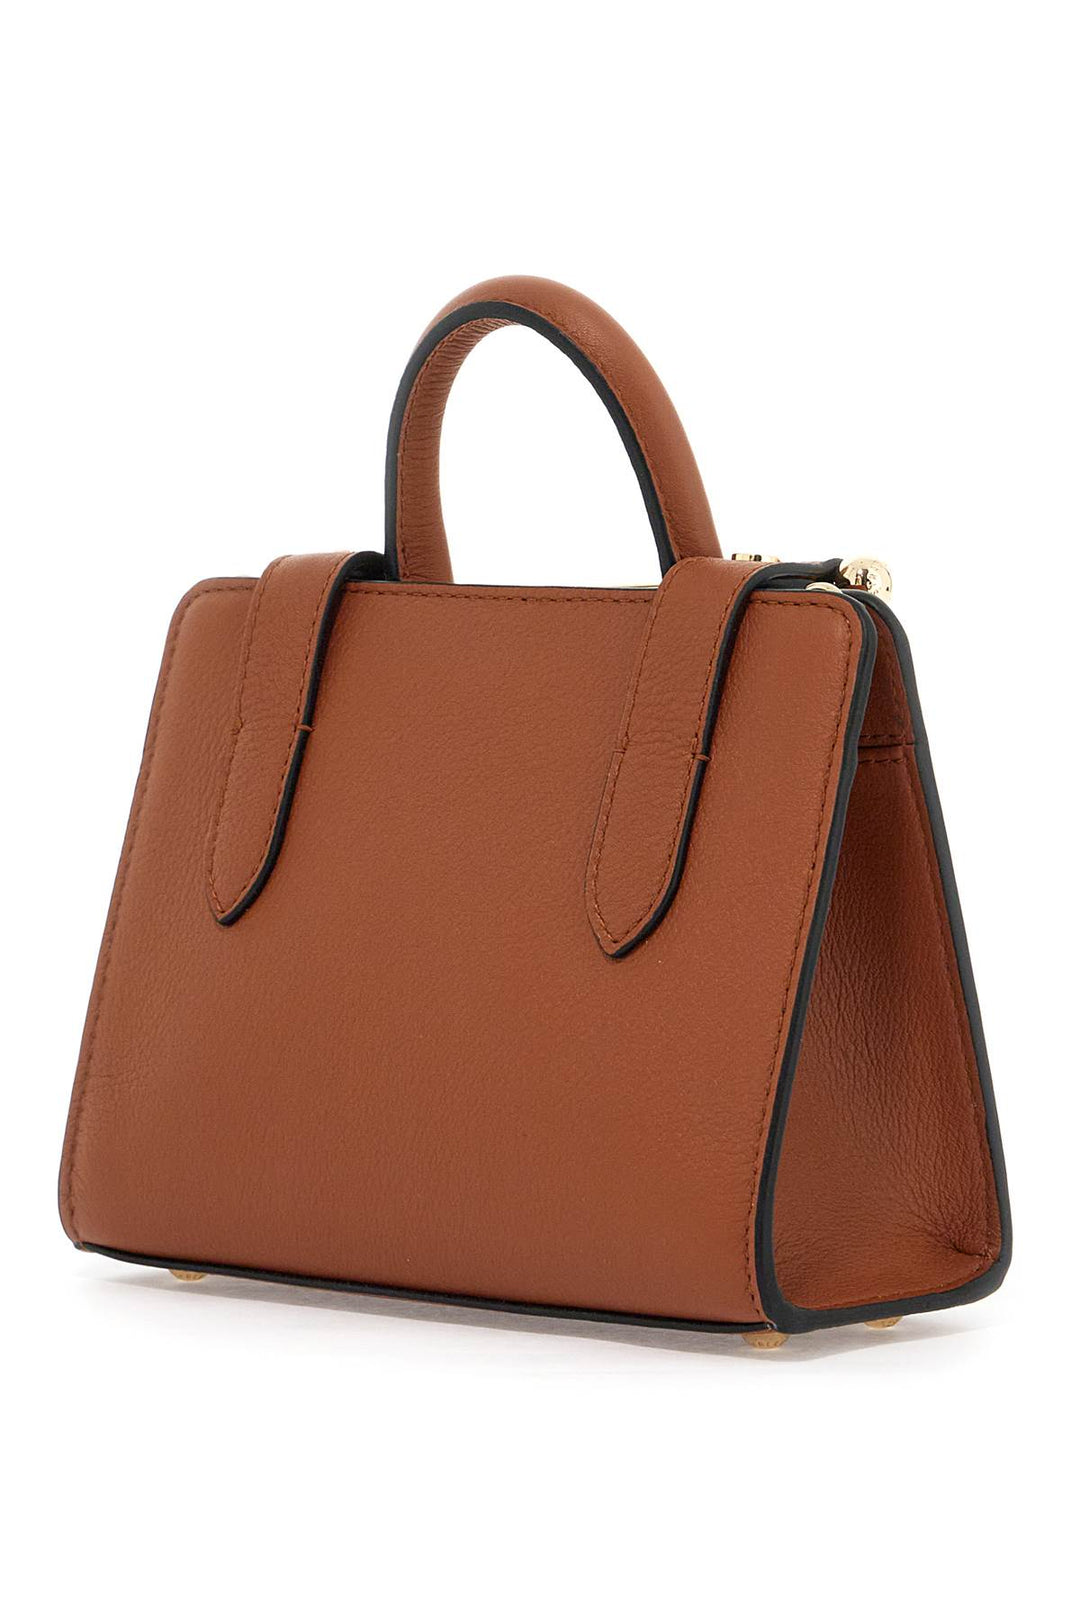 Strathberry Nano Tote Leather Bag   Brown